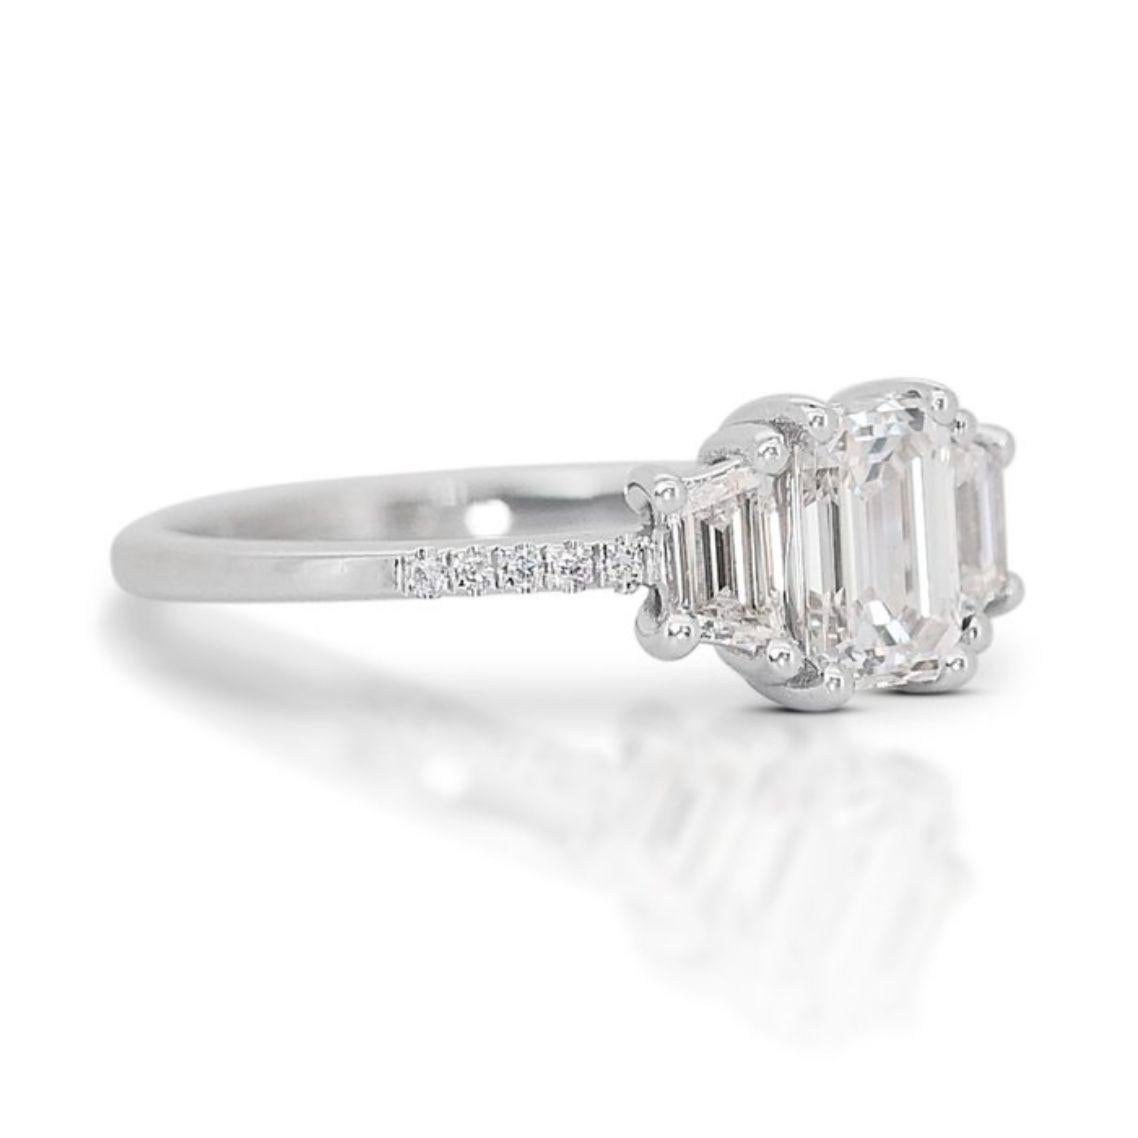 Embrace the captivating beauty of this remarkable ring, featuring a mesmerizing 0.80 carat emerald cut diamond as its centerpiece. Graded G in color and boasting an exceptional IF clarity, this diamond exudes timeless elegance with its elongated